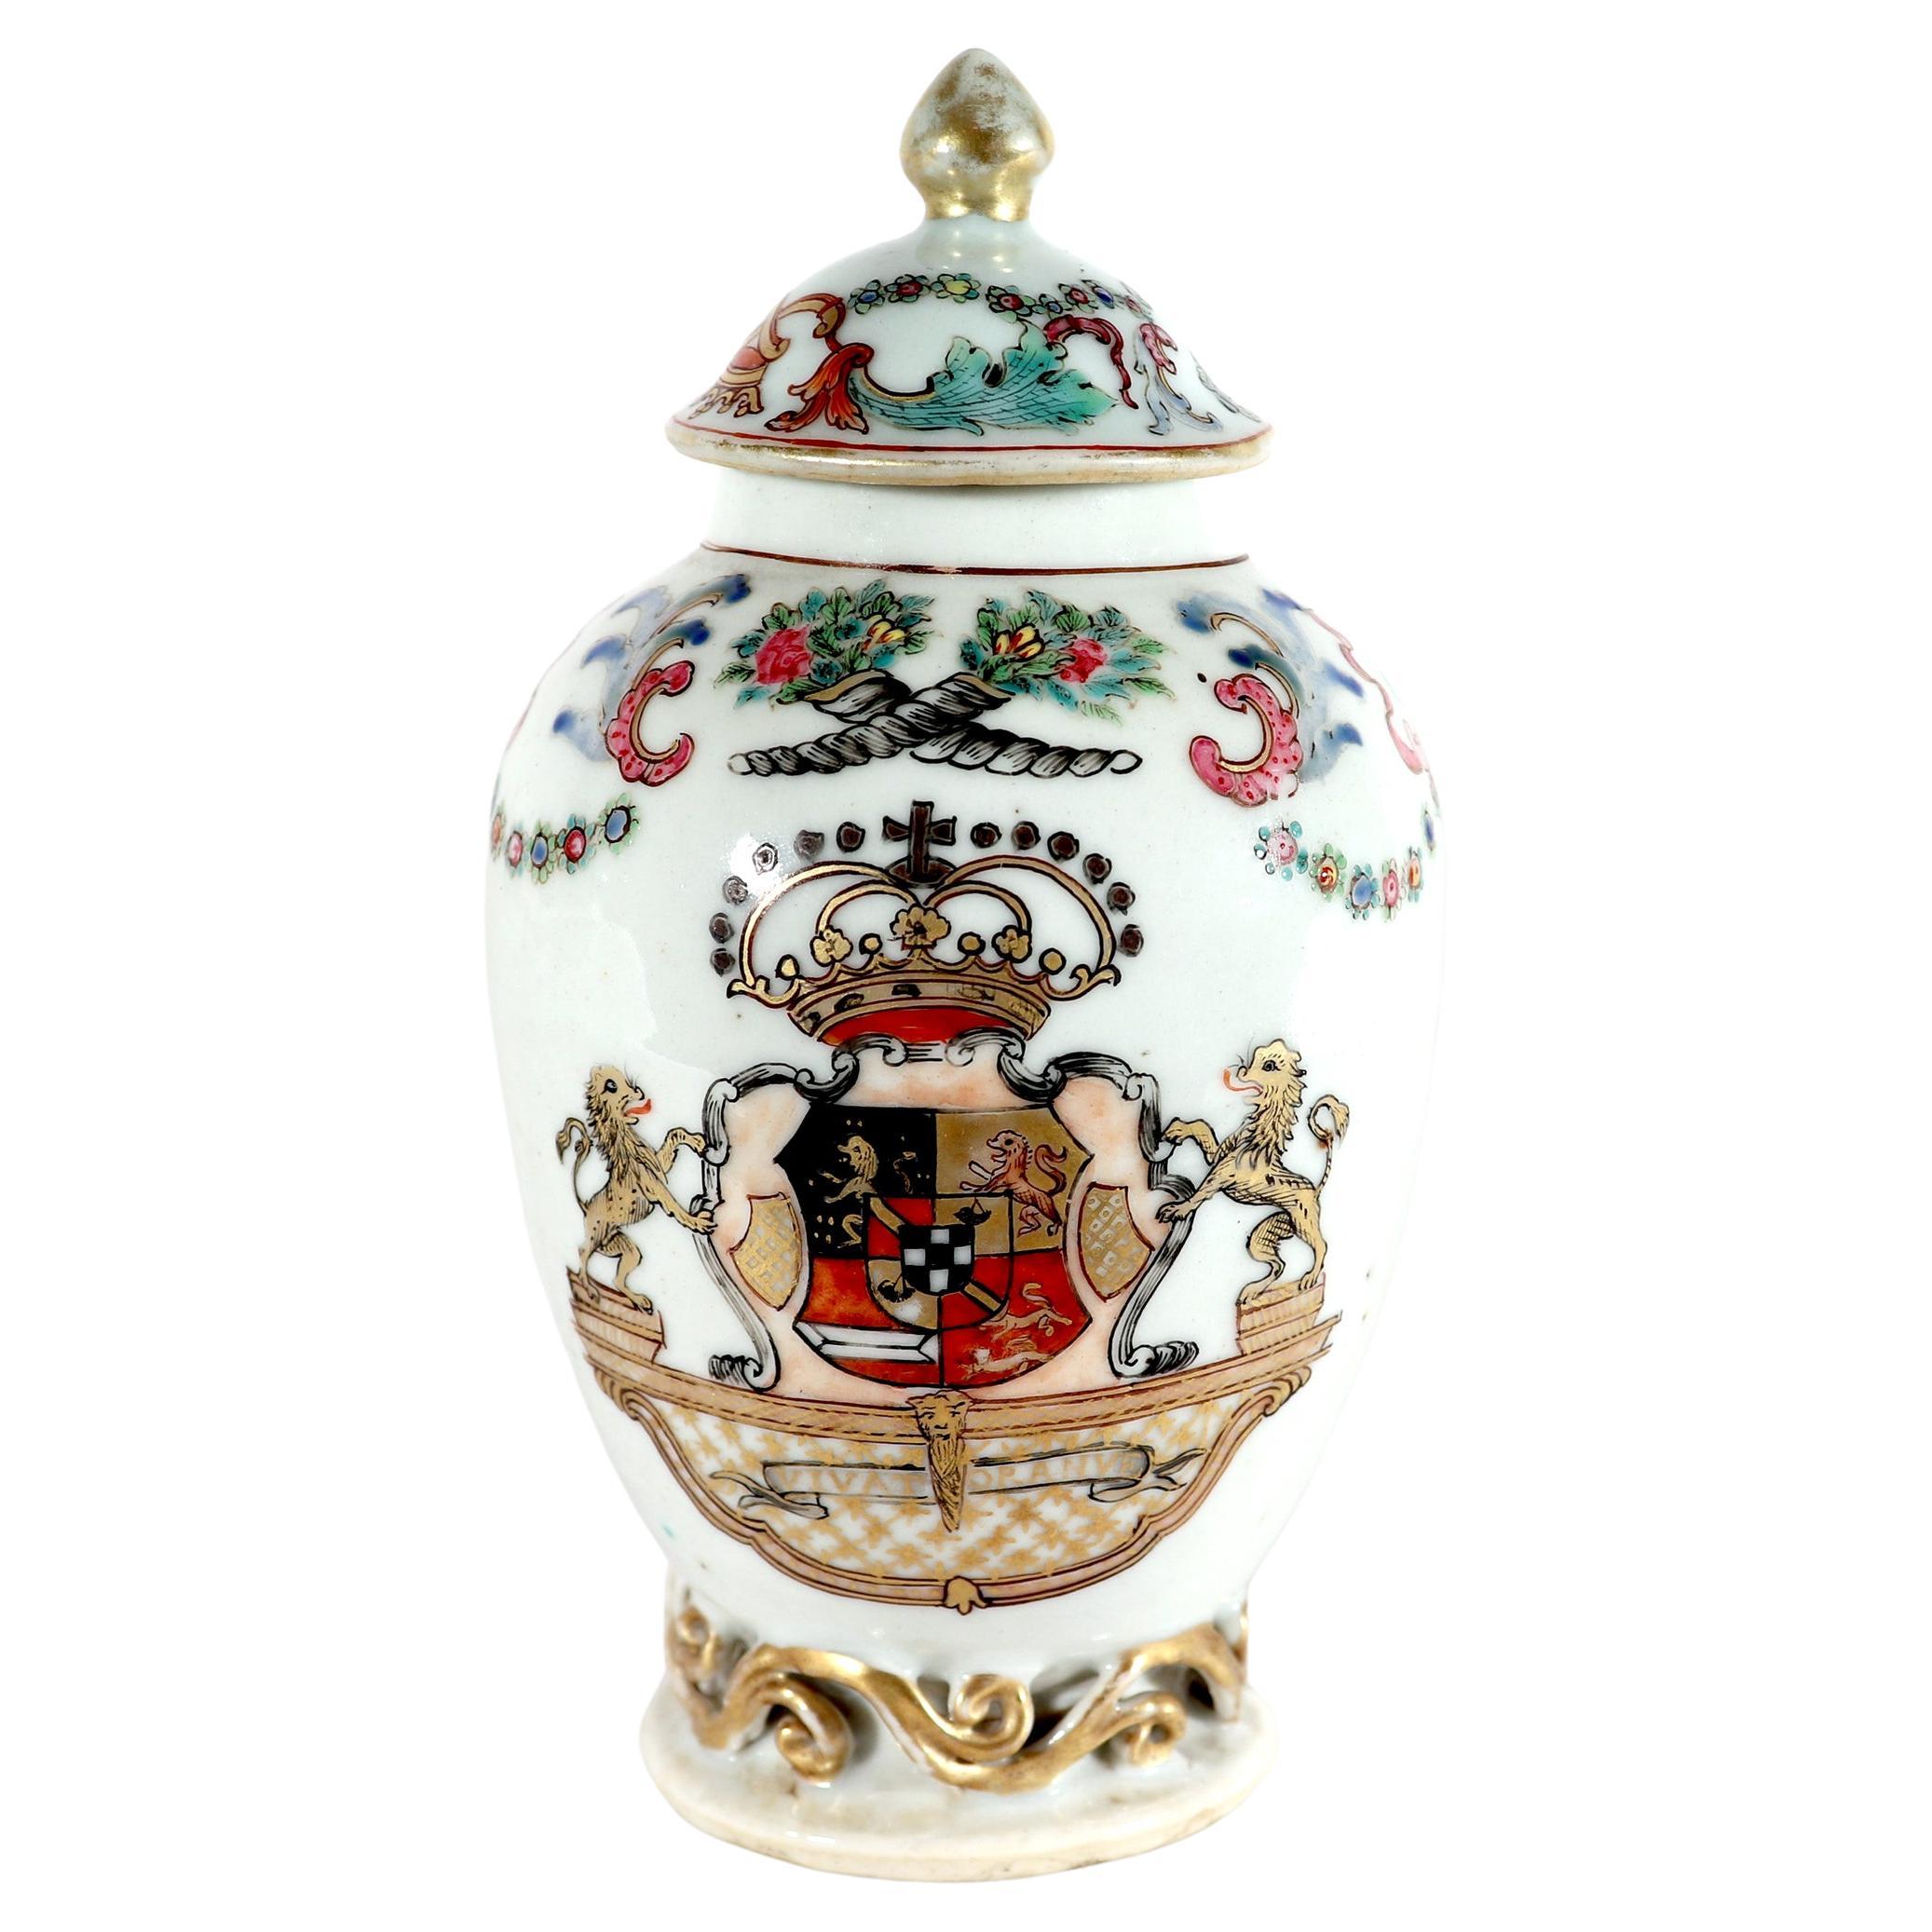 Chinese Export Armorial Porcelain Tea Caddy, Arms of Prince Willem IV of Orange